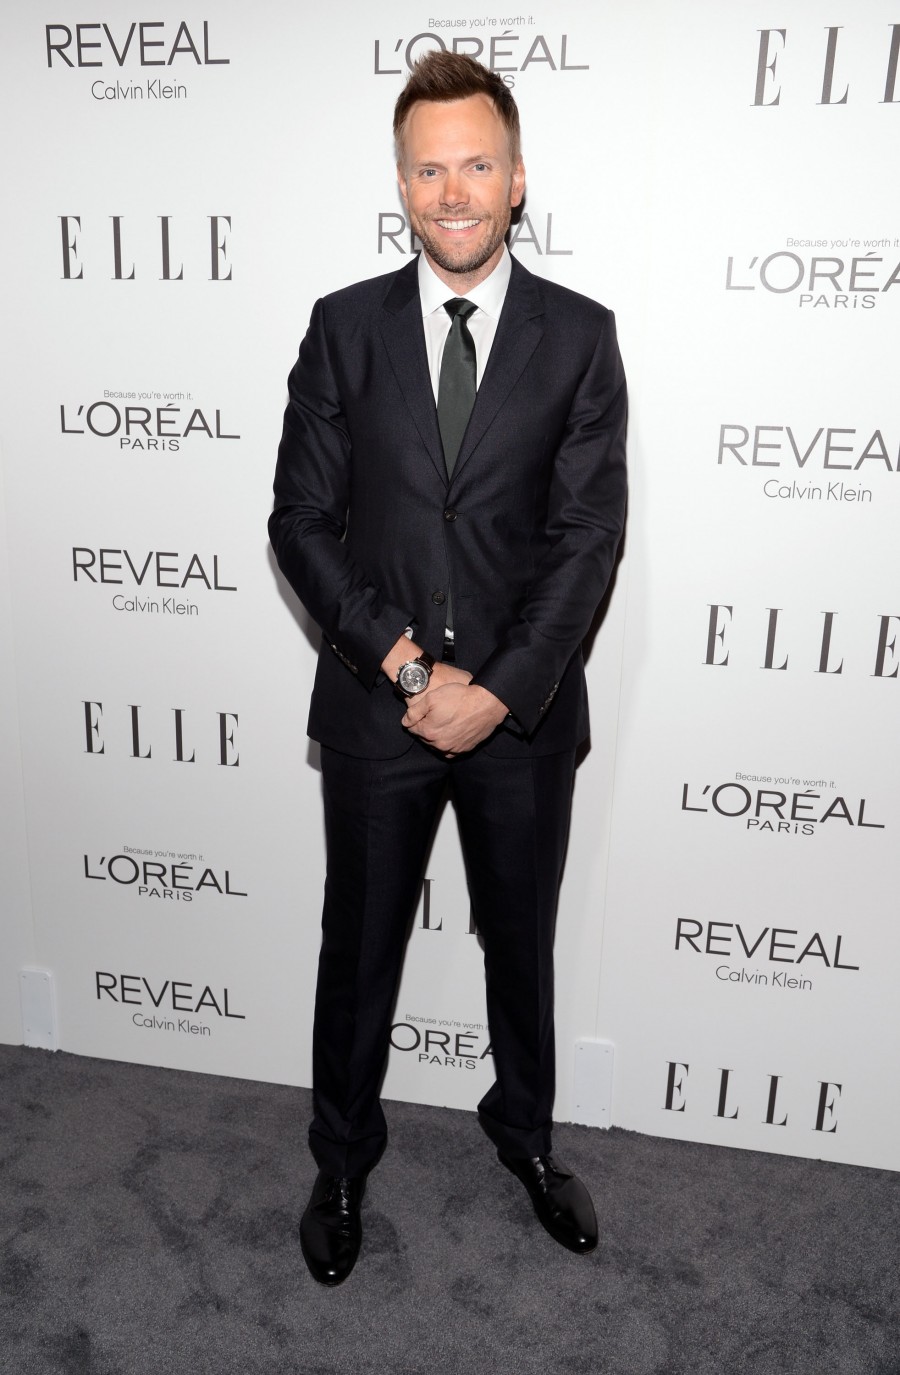 The host of Elle's 21st Annual Women in Hollywood Celebration, comedian and actor Joel McHale wore Calvin Klein Collection for  the October 20th event held at the Four Seasons Hotel in Beverly Hills.